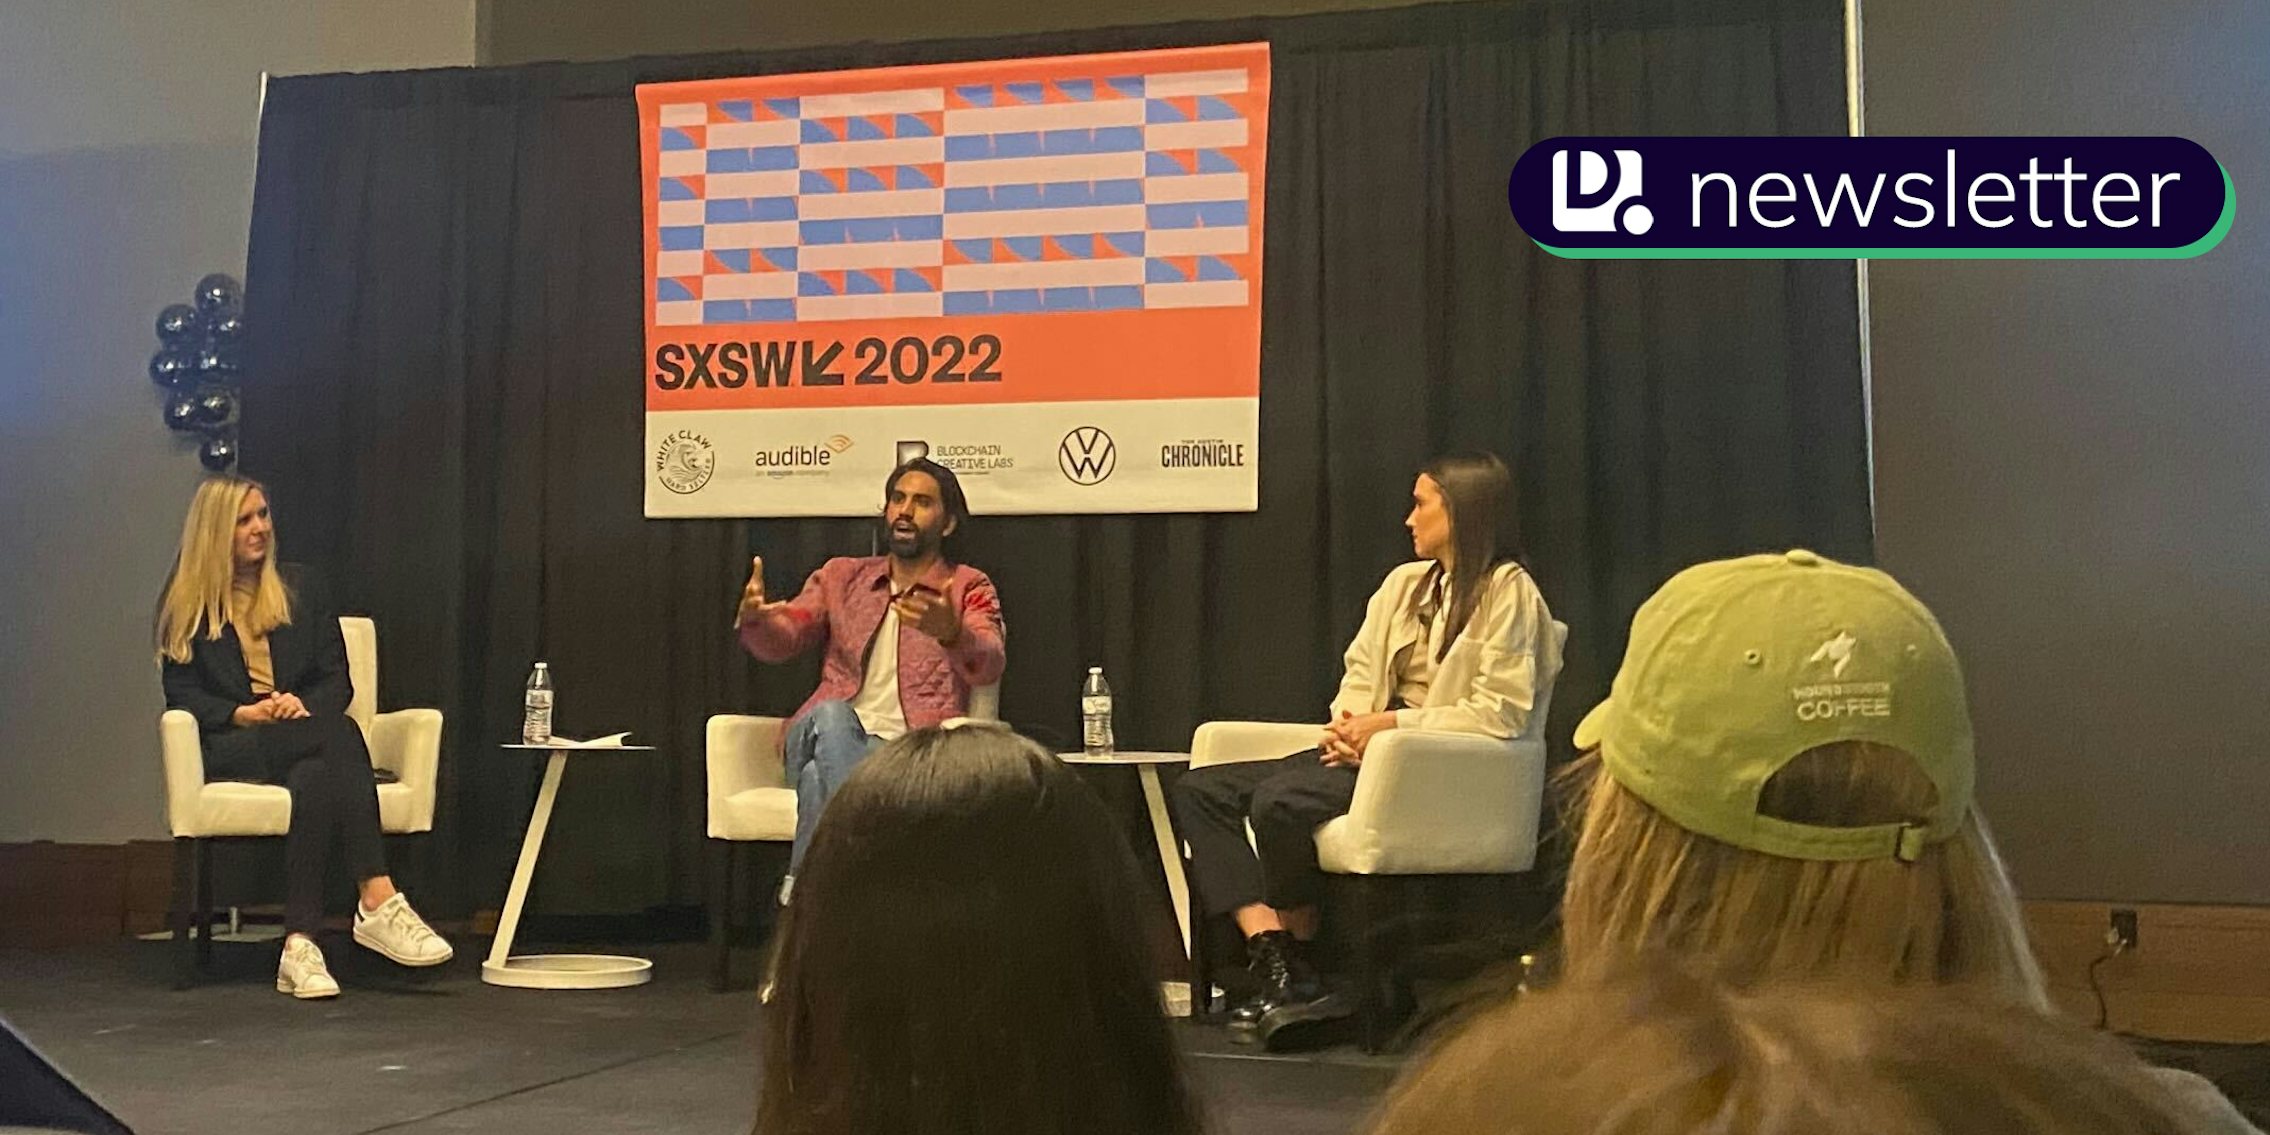 A panel at SXSW. In the top right corner is the Daily Dot newsletter logo.